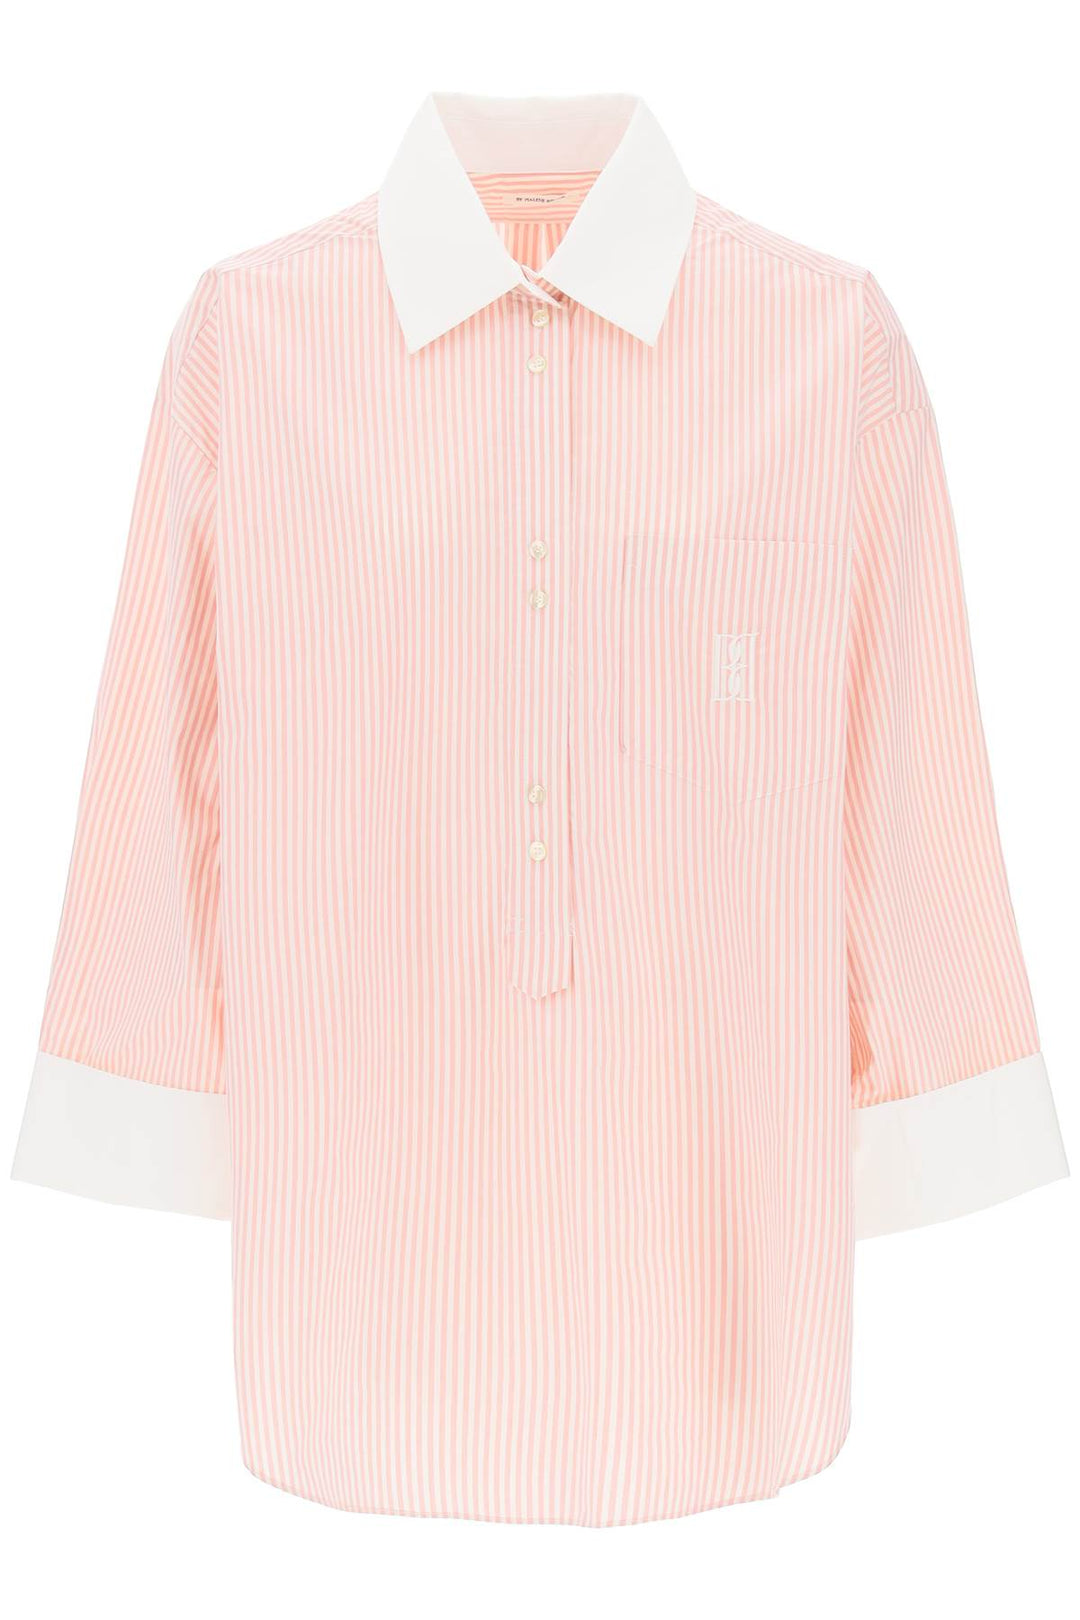 By Malene Birger Replace With Double Quotemaye Striped Tunic Style   Rosa